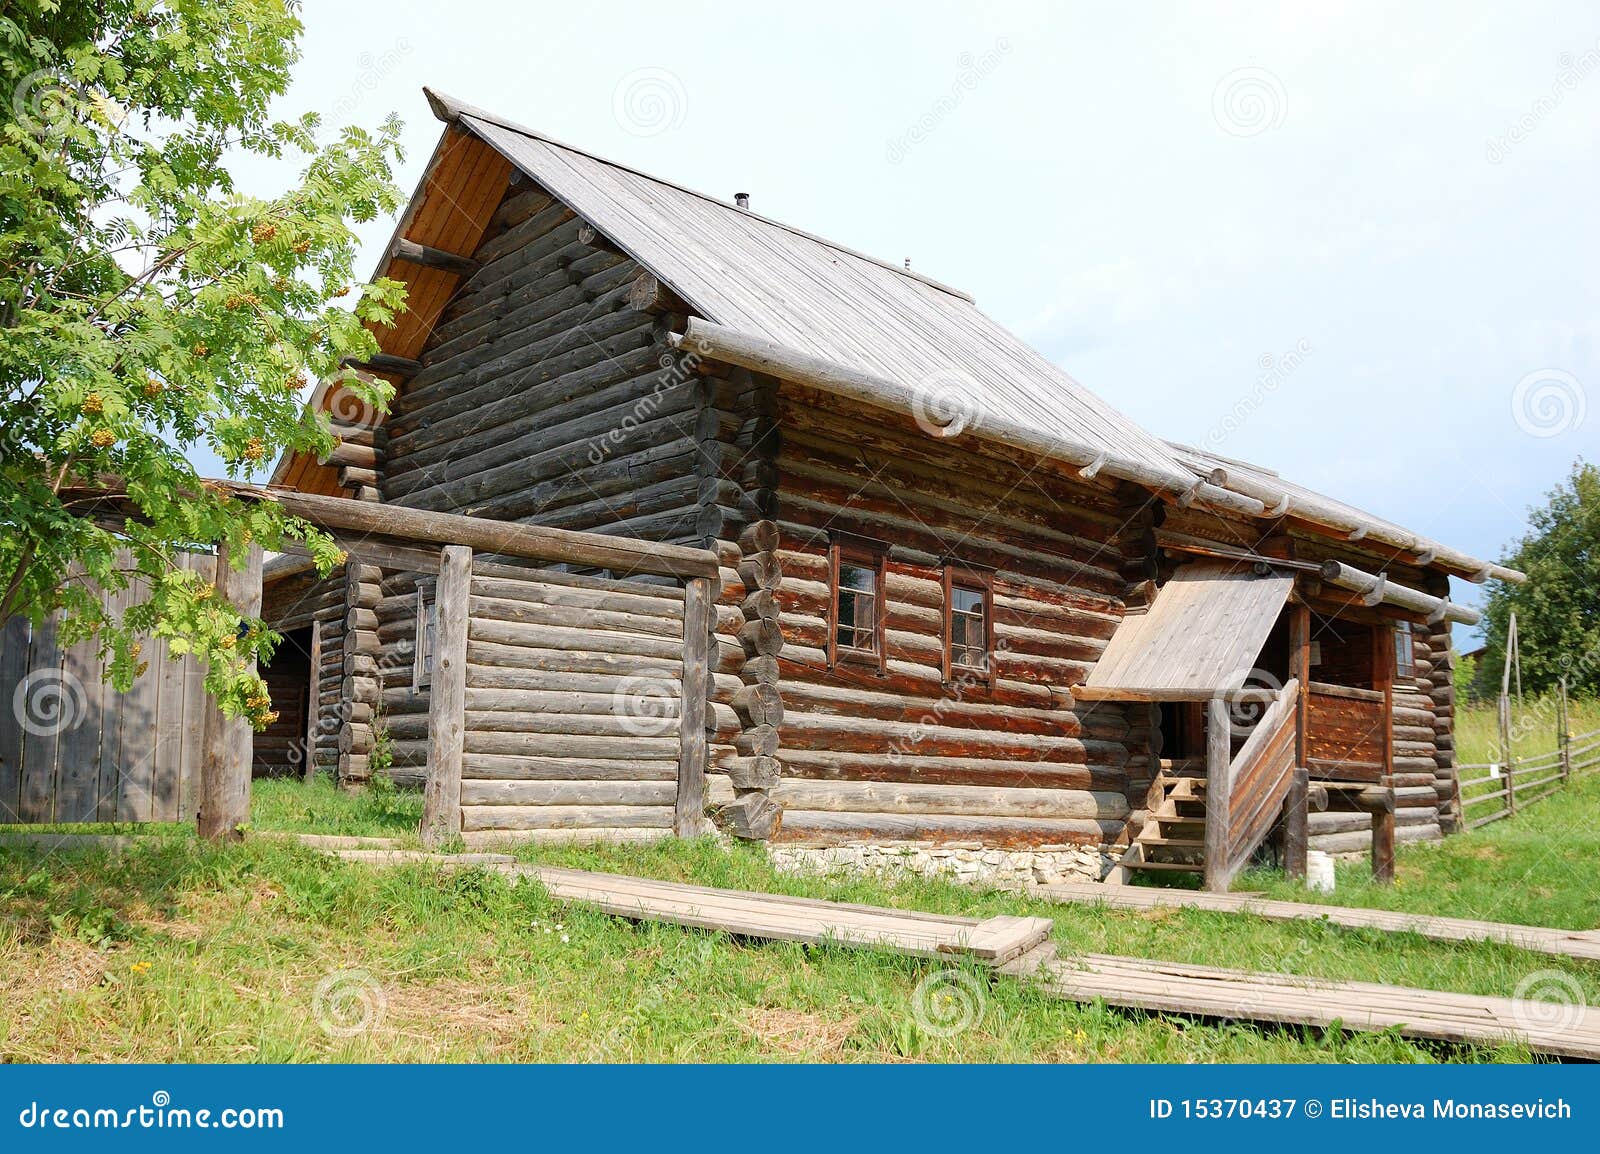  - traditional-russian-rural-house-15370437